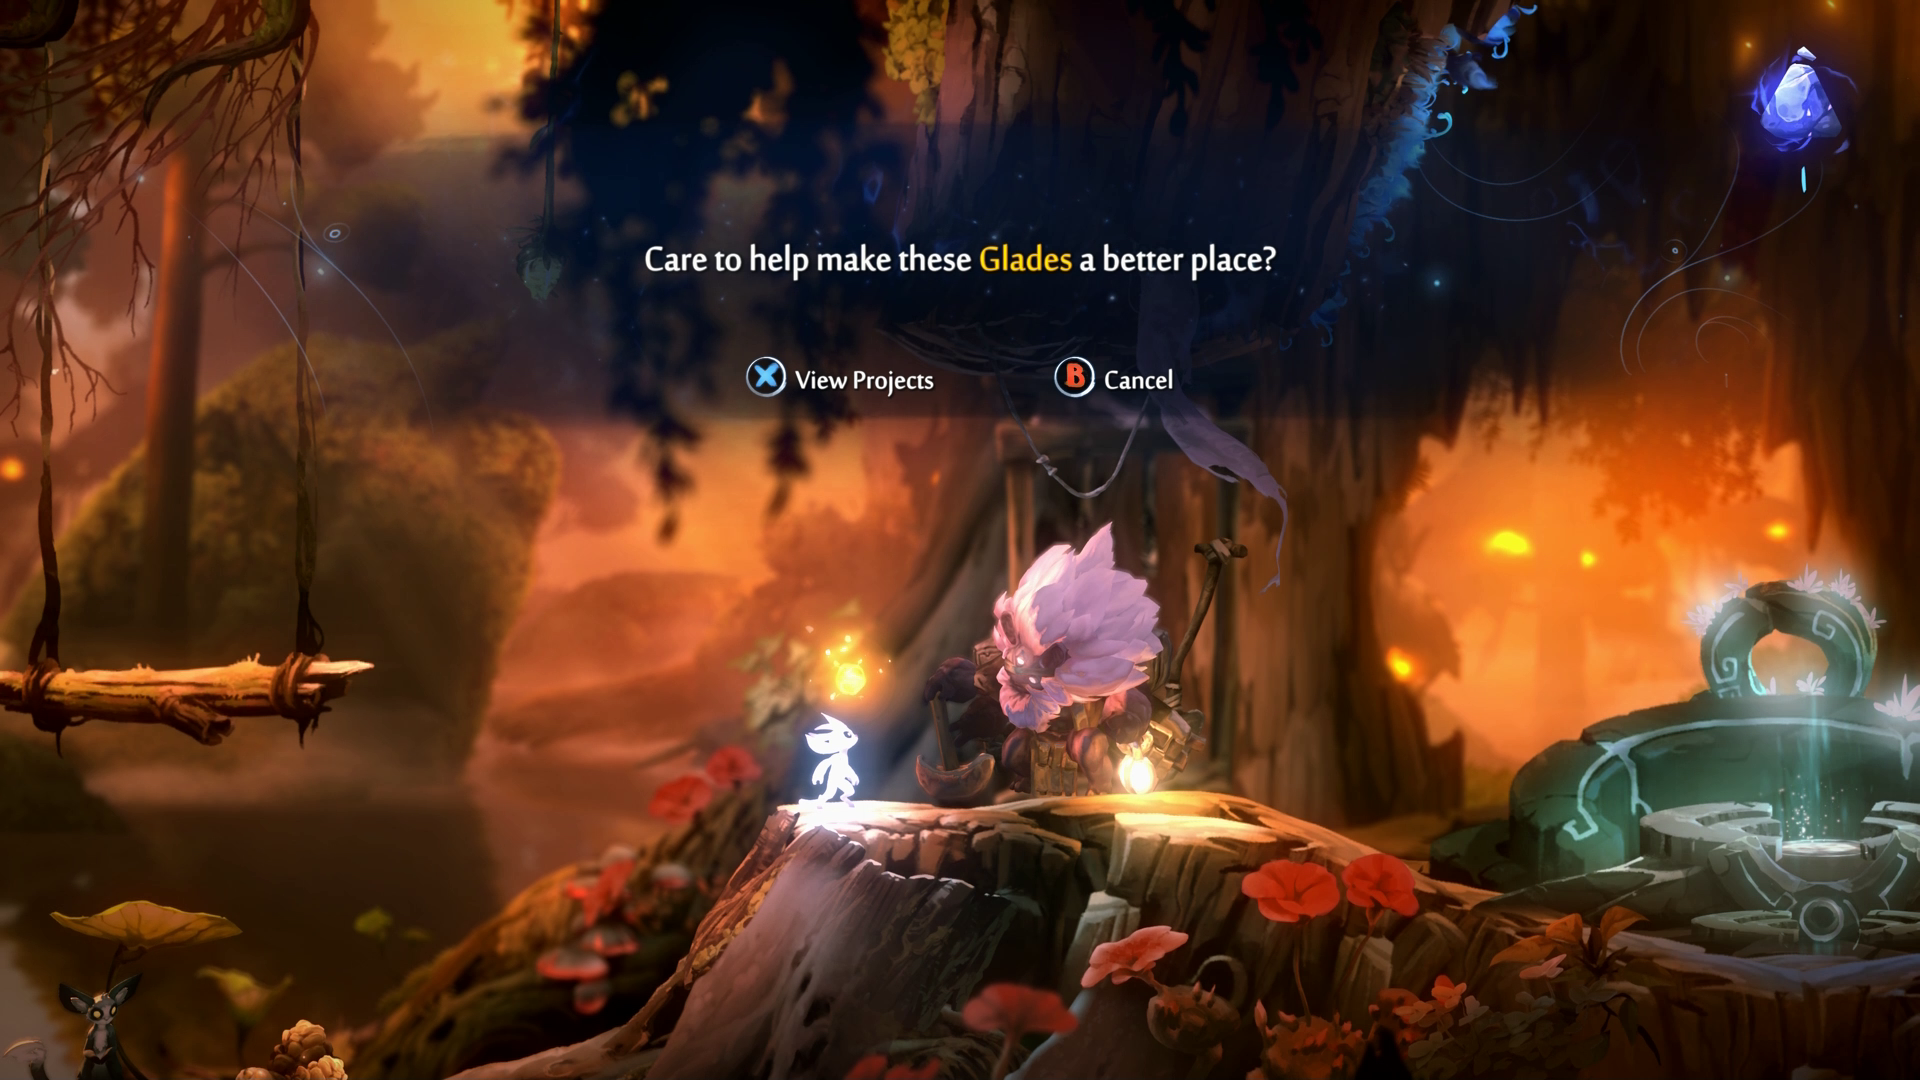 A screenshot from Ori and the Will of the Wisps. A dialog appears in-game that asks, "Care to help make these Glades a better place?" and indicates "X" for "View Projects" and "B" for "Cancel."